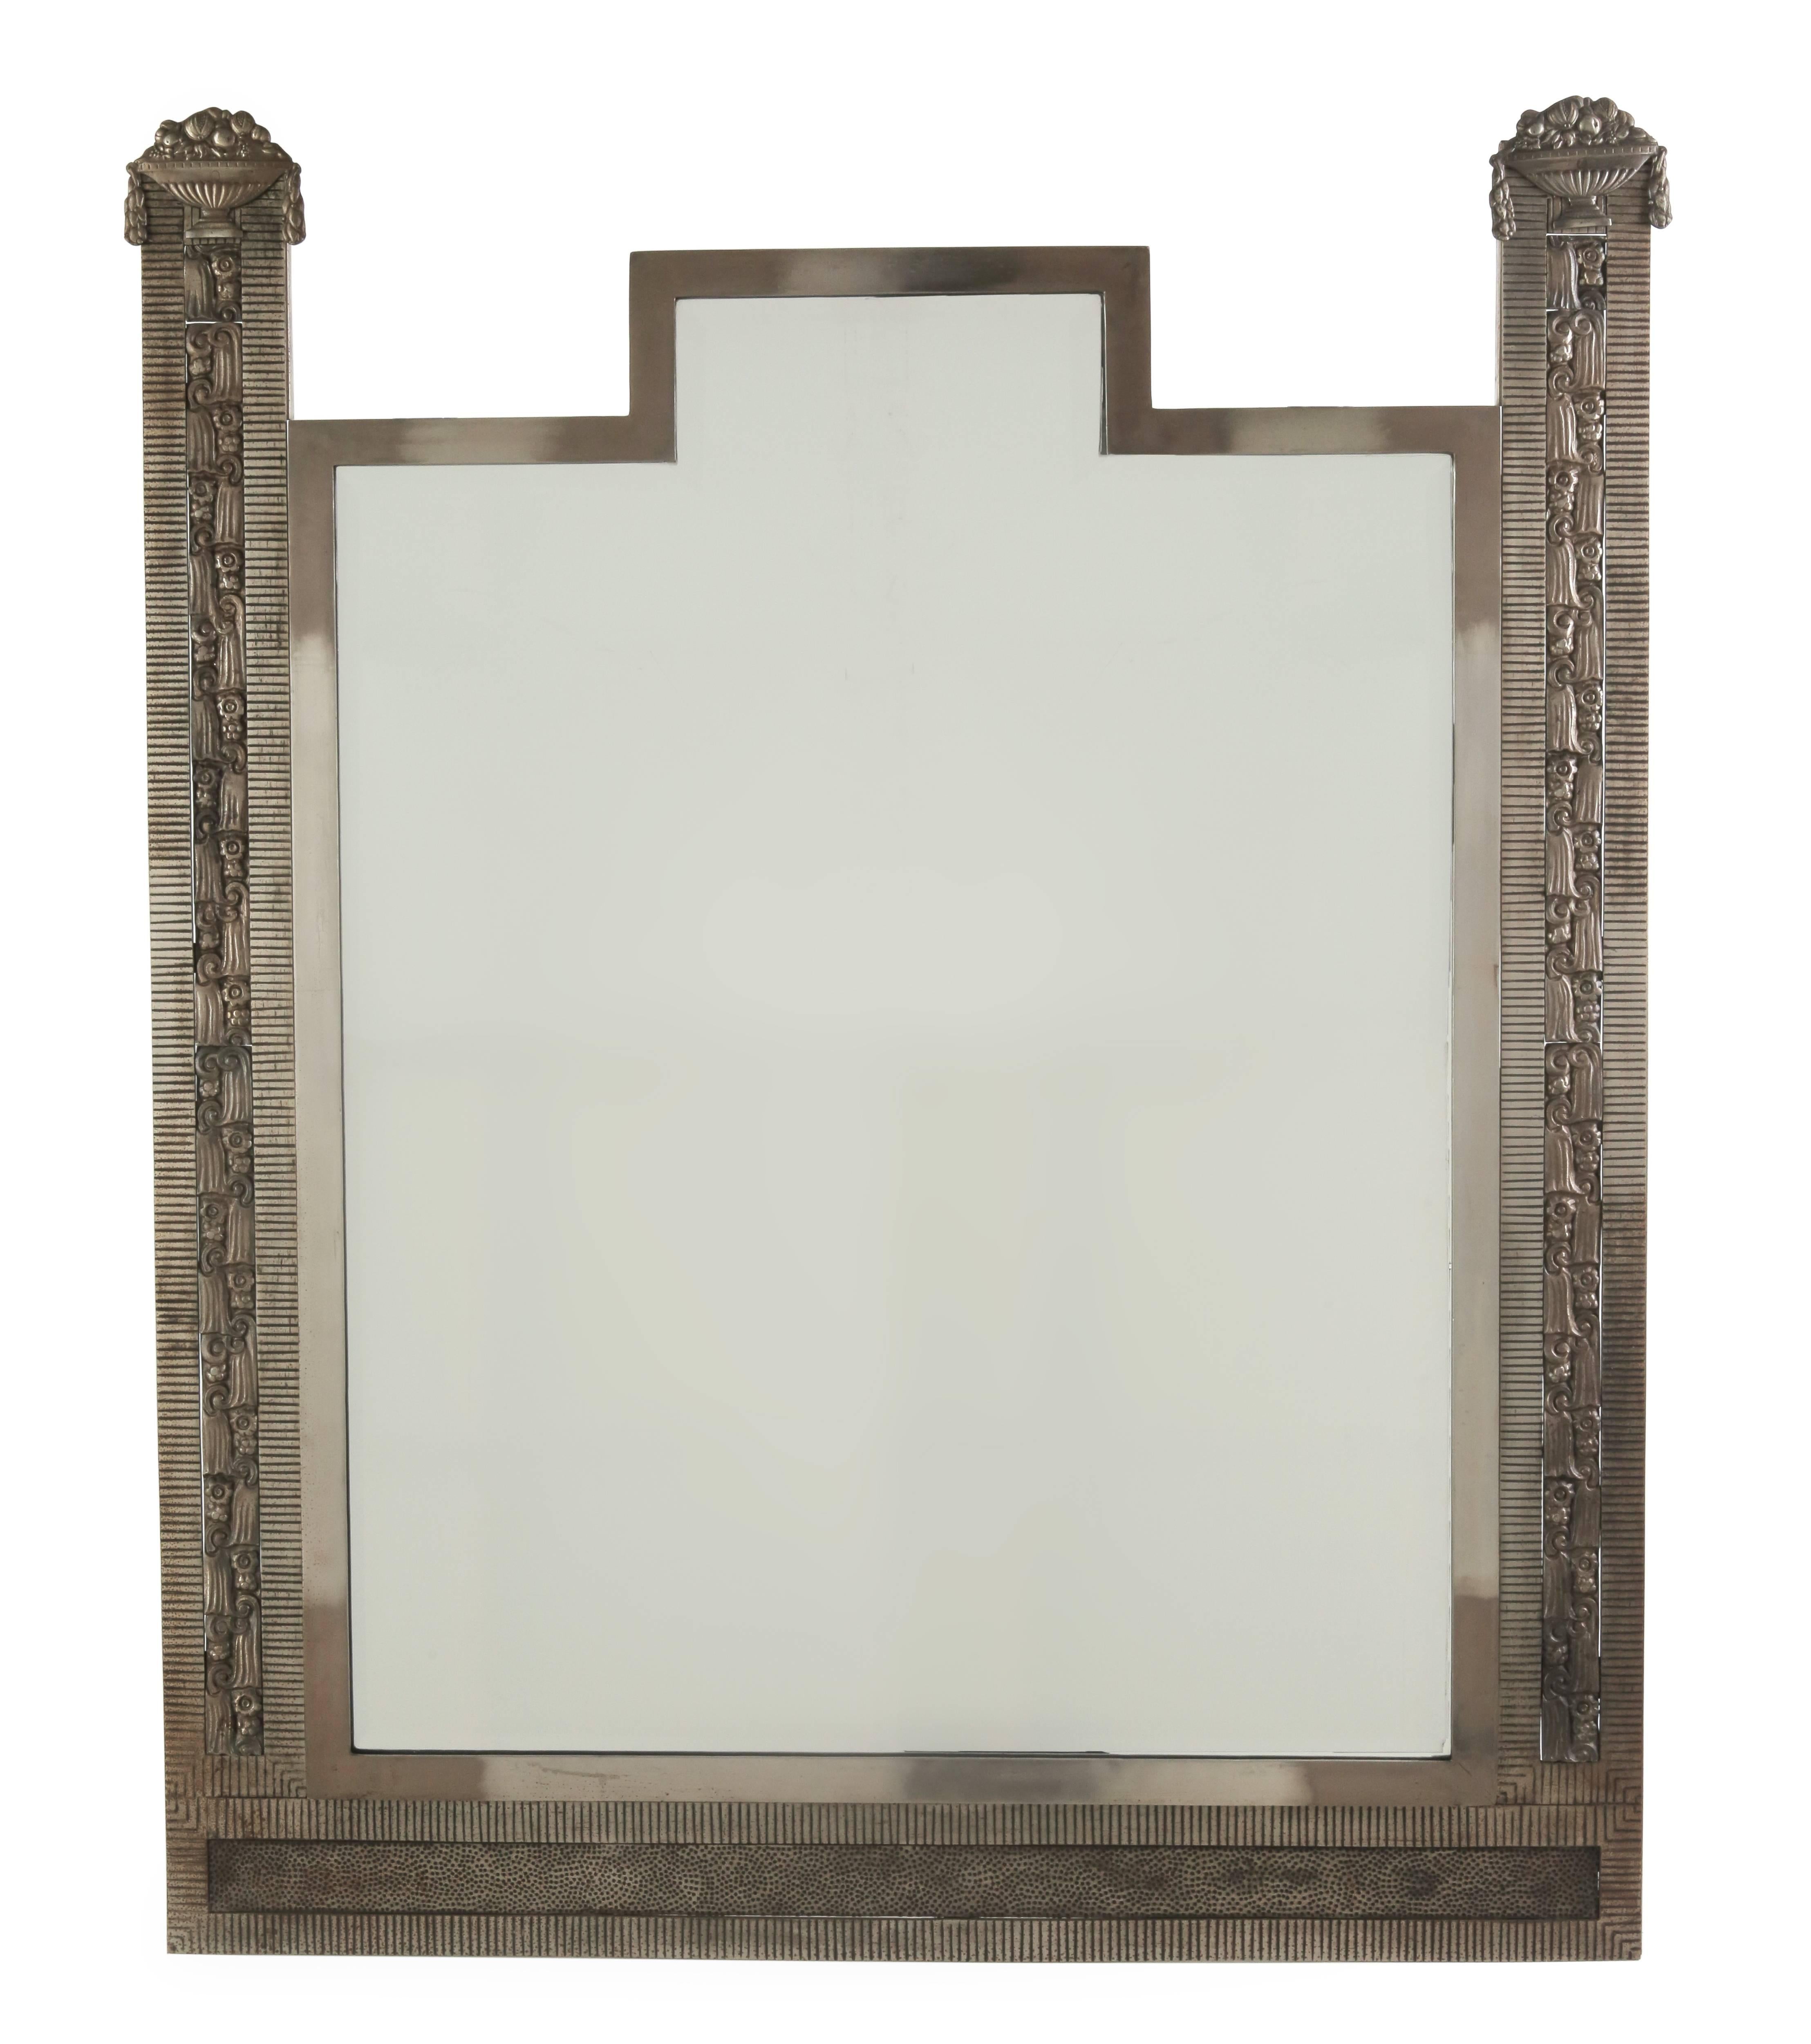 A large hand-hammered nickeled iron, fine French wall mirror. Floral motif with fruit urn design flanks sides and brings to view a typical shaped beveled mirror inset.